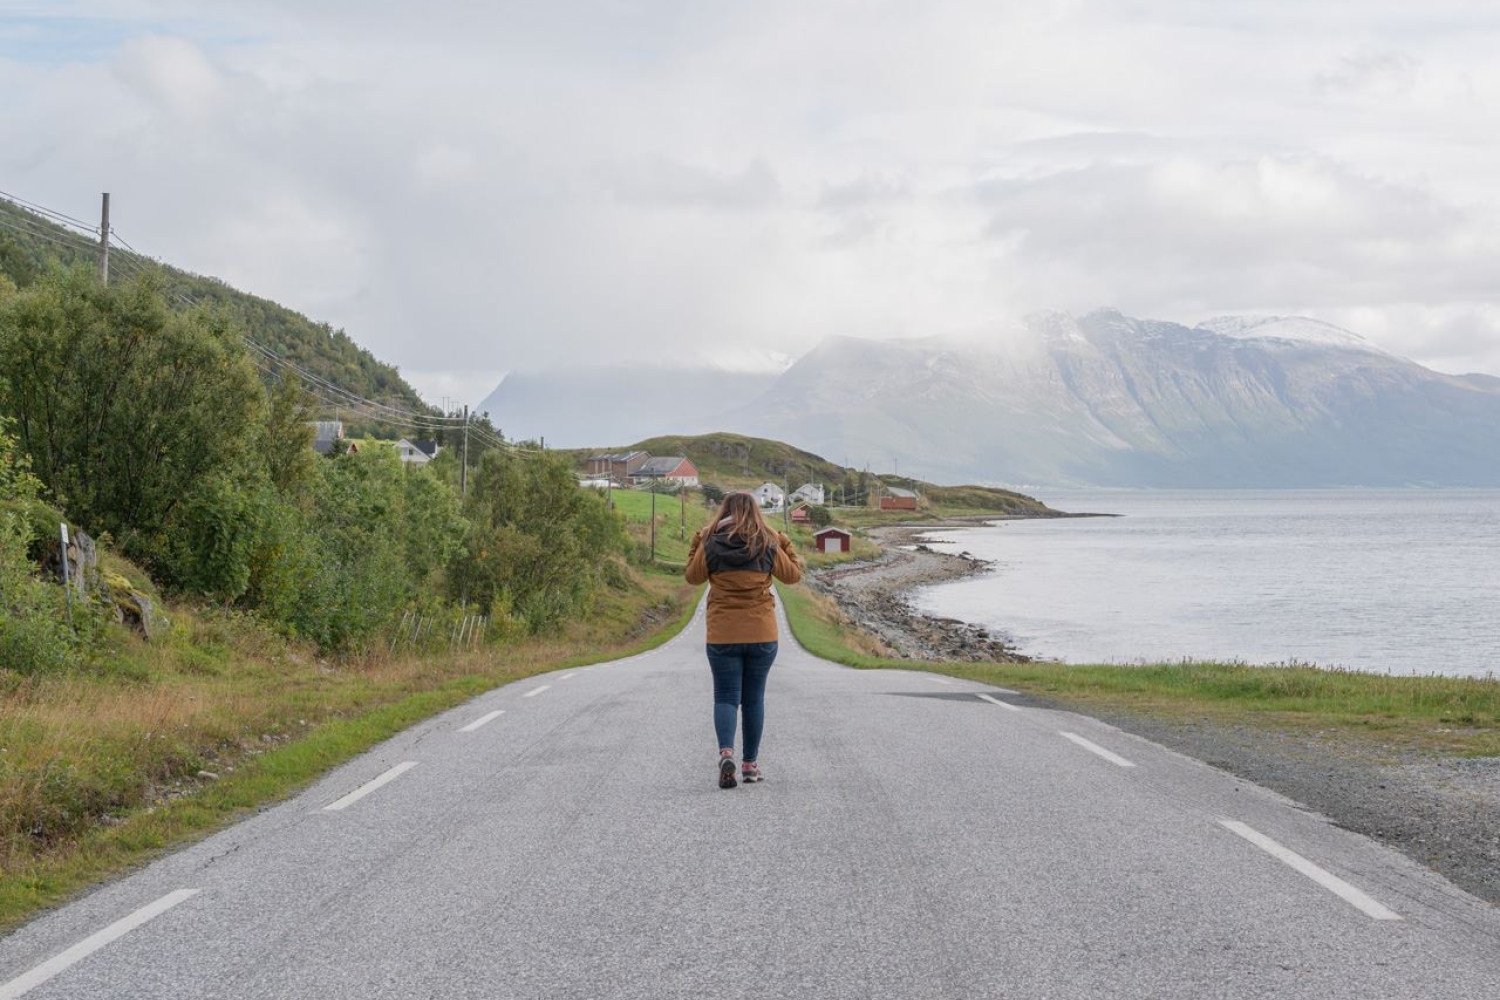 Arctic Roadtrip: Sommarøy with scenic picnic Ⓥ | Small group 8 max | Sightseeing | 4x4 VW Van